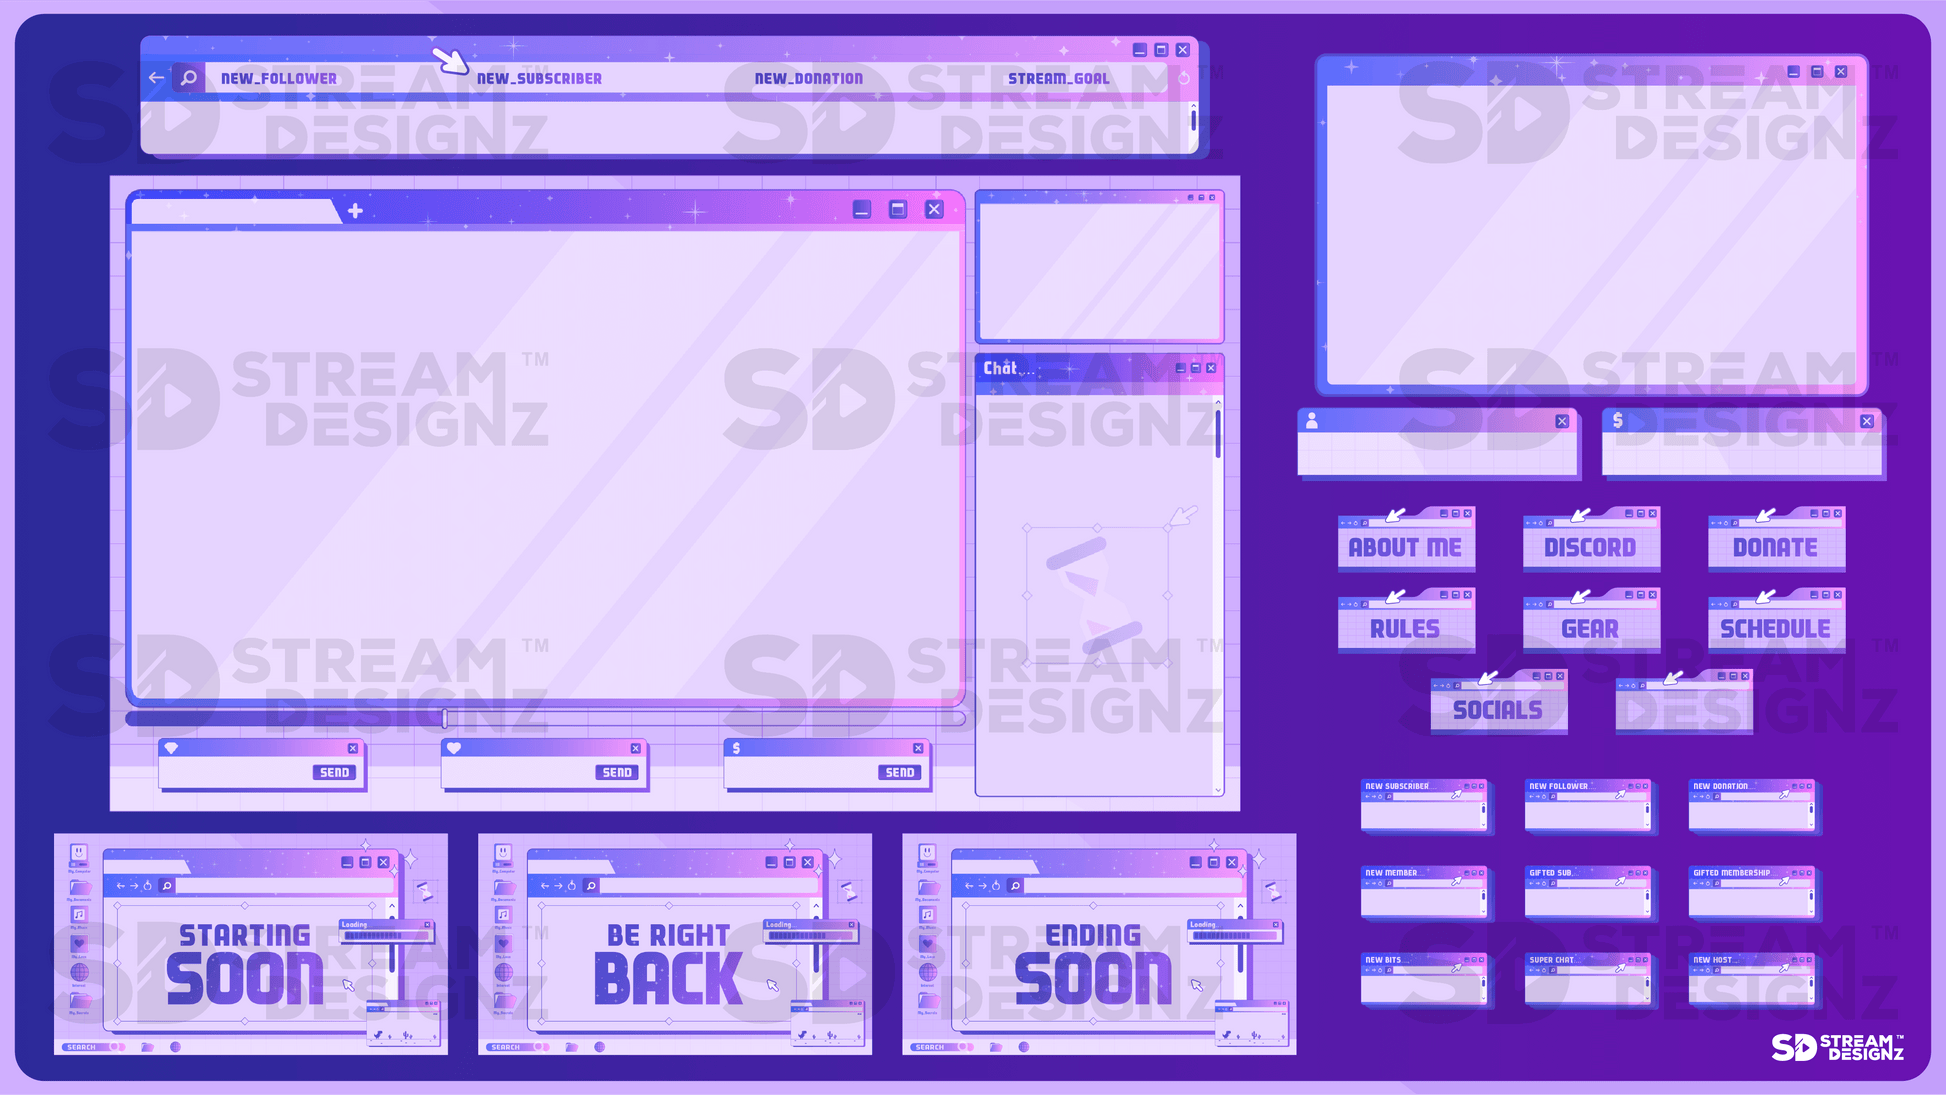 animated stream overlay package feature image y2k stream designz